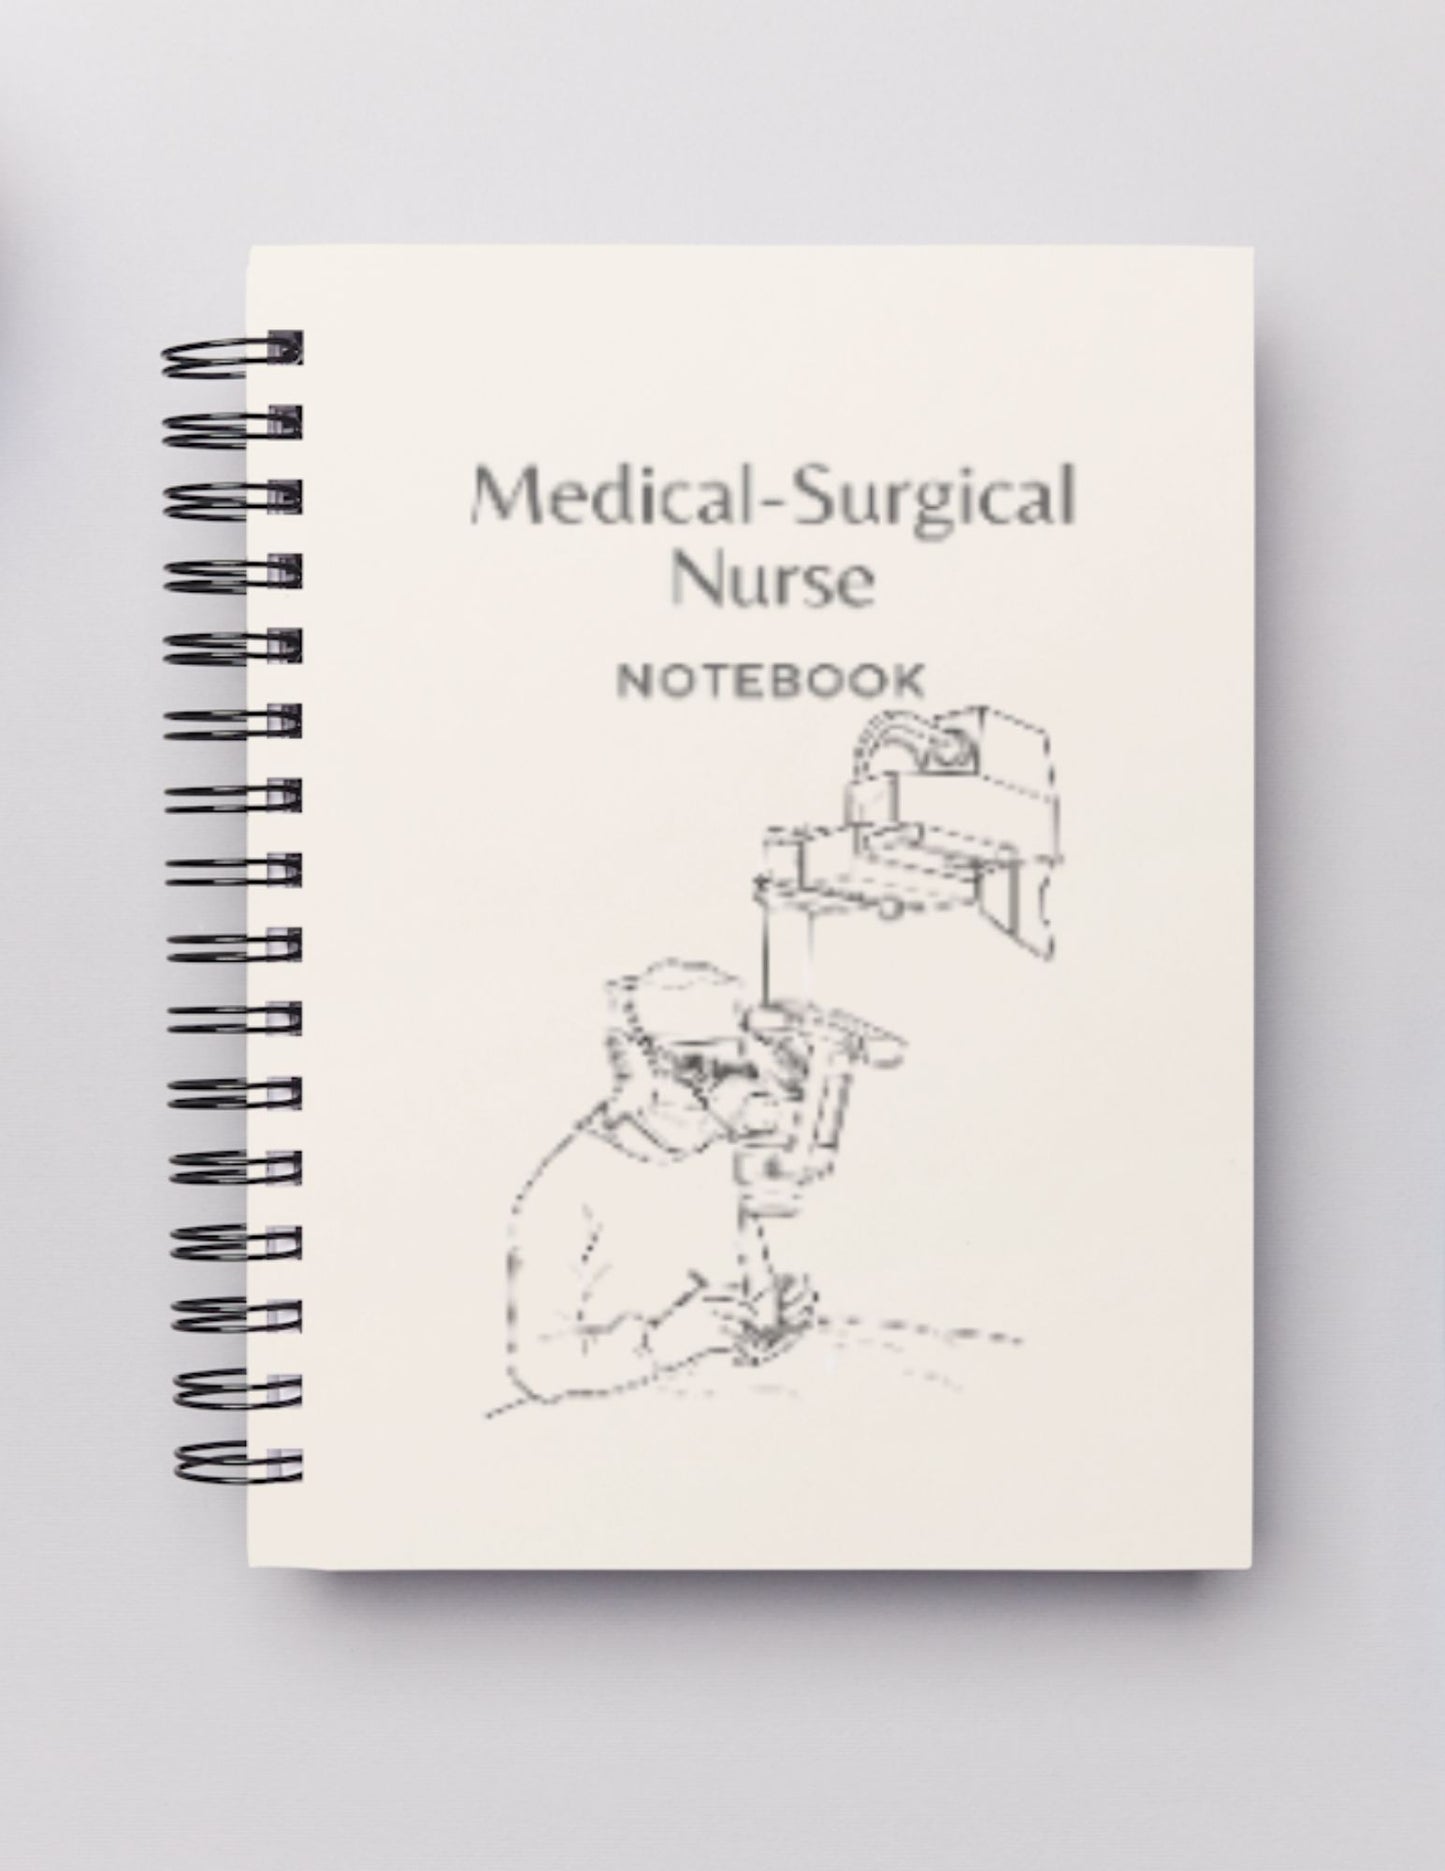 Medical-Surgical (1 patients) Nurse Report Notebook